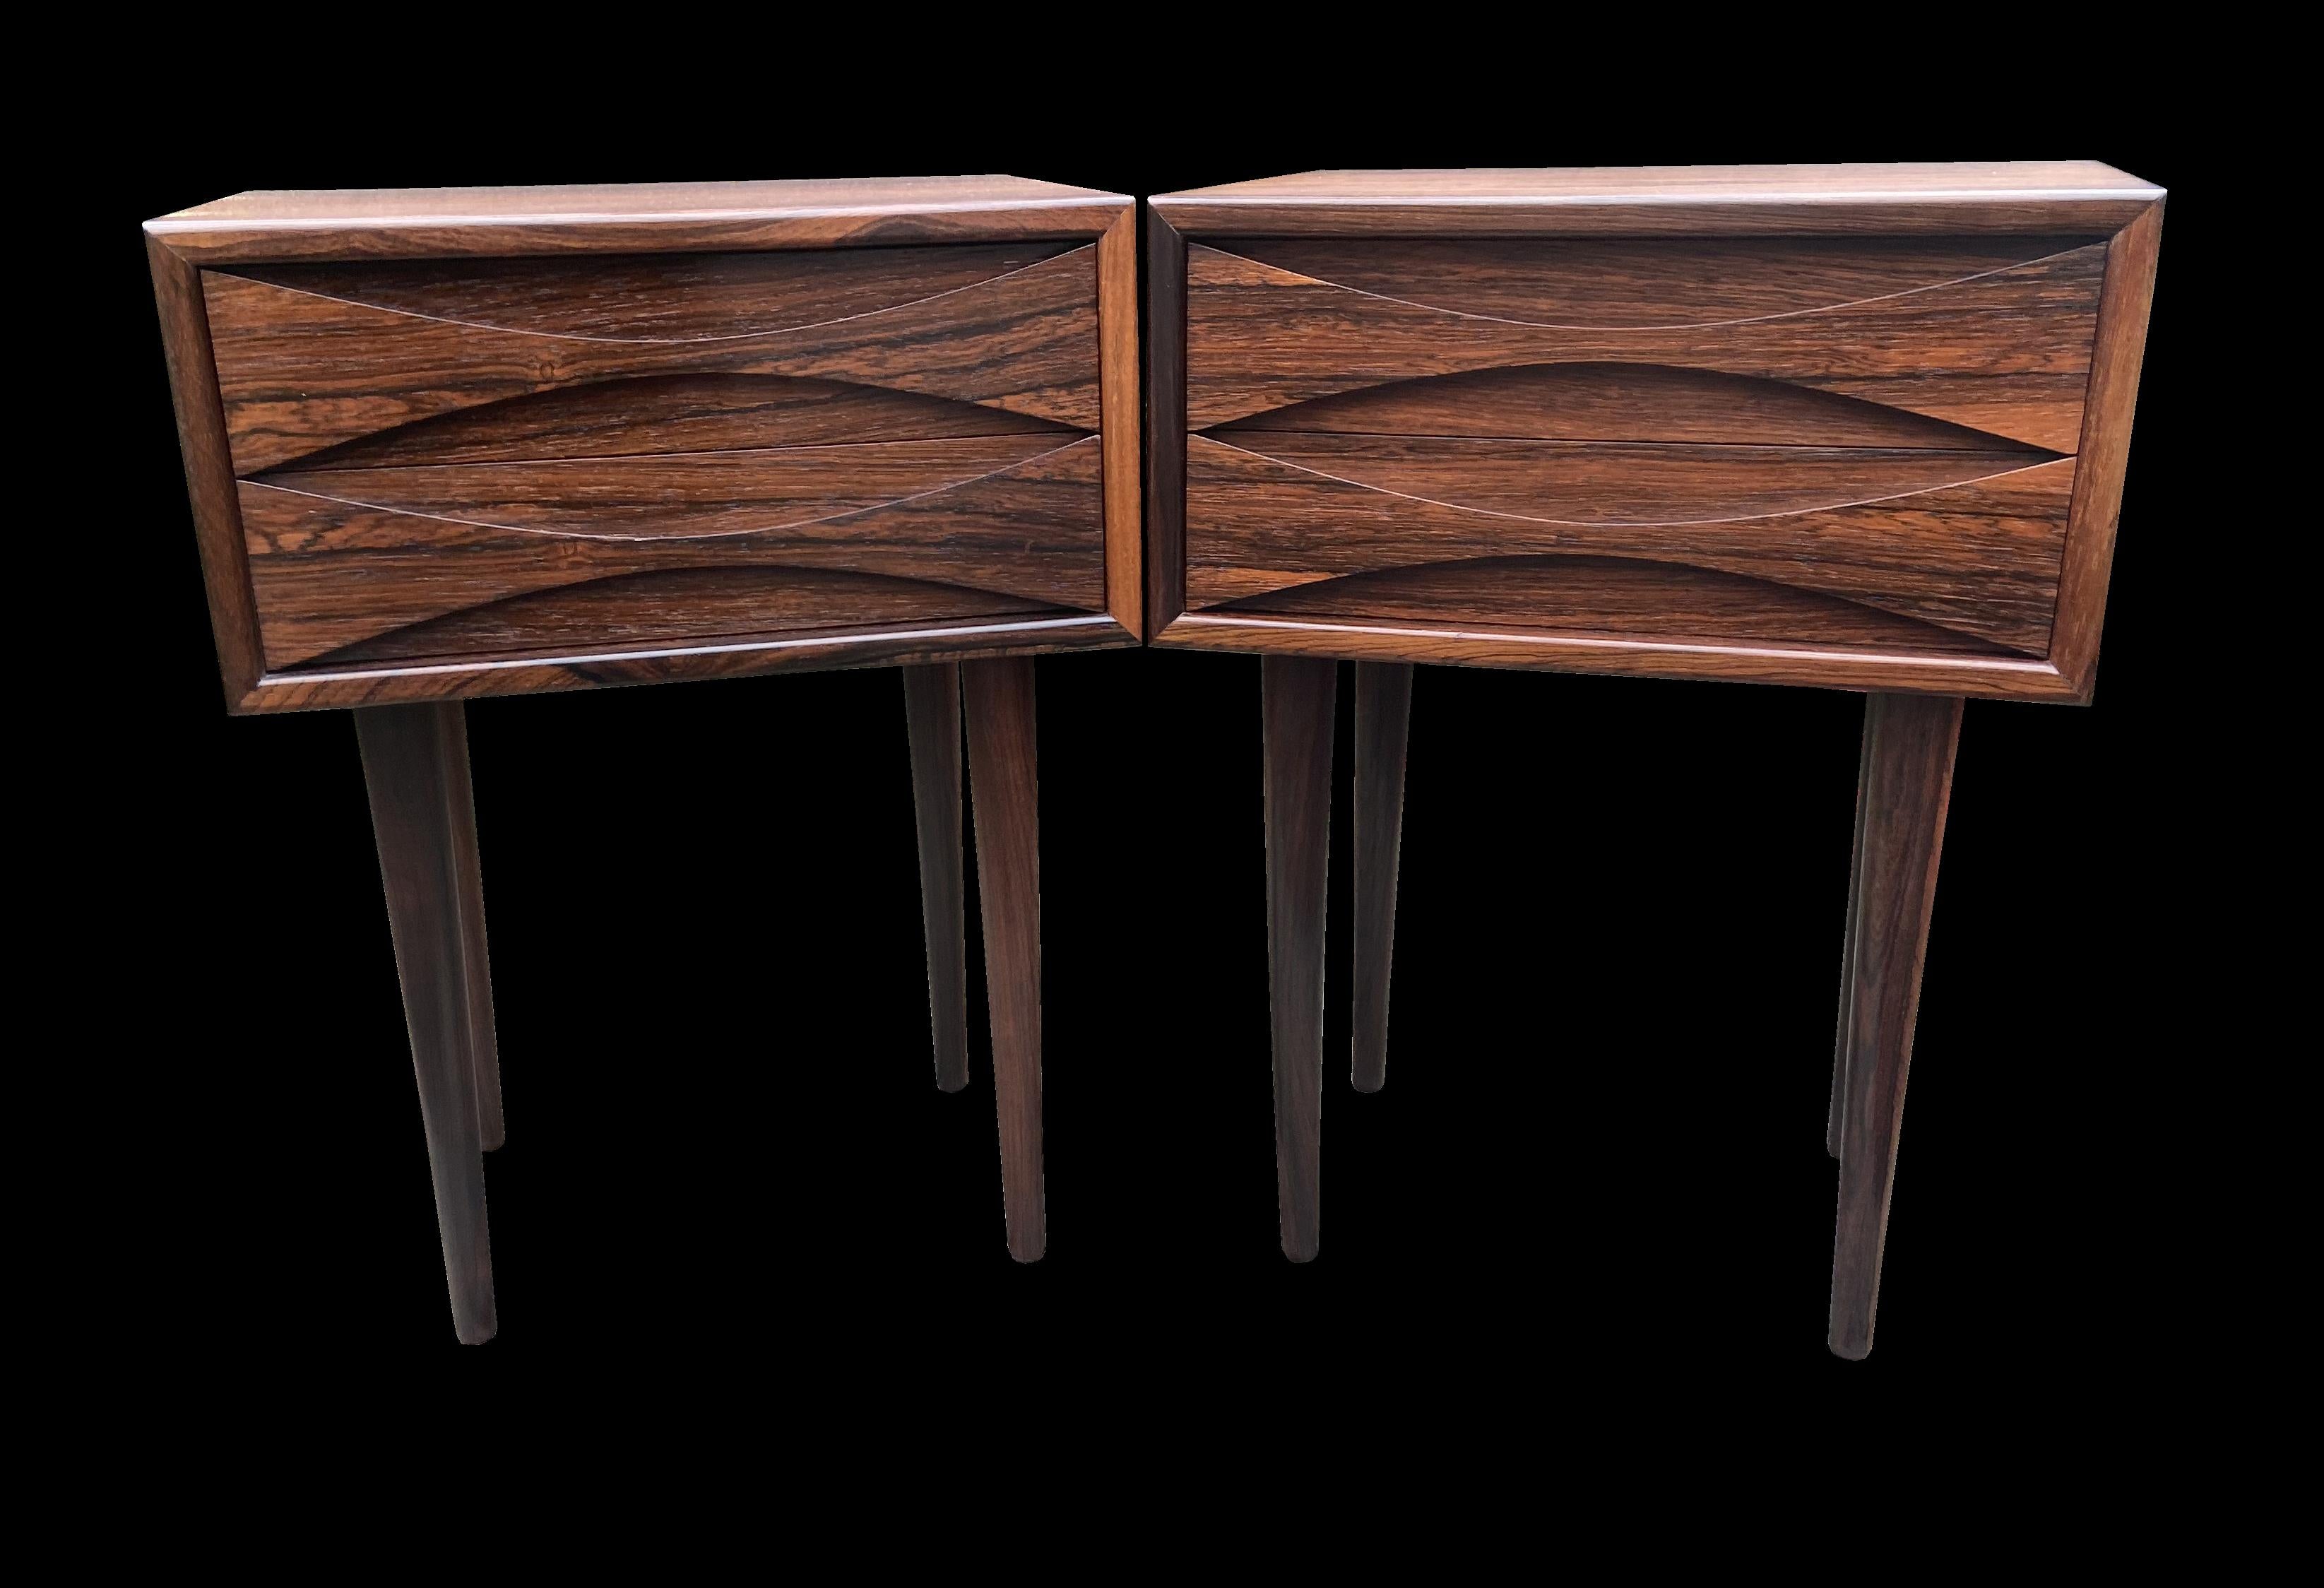 A very fine matching pair of these highly prized and hard to find bedside tables, both in great condition.
Made from finely figured Santos Rosewood or Machaerium Scleroxylon, they are not liable to CITES certification so no problem to import/export.